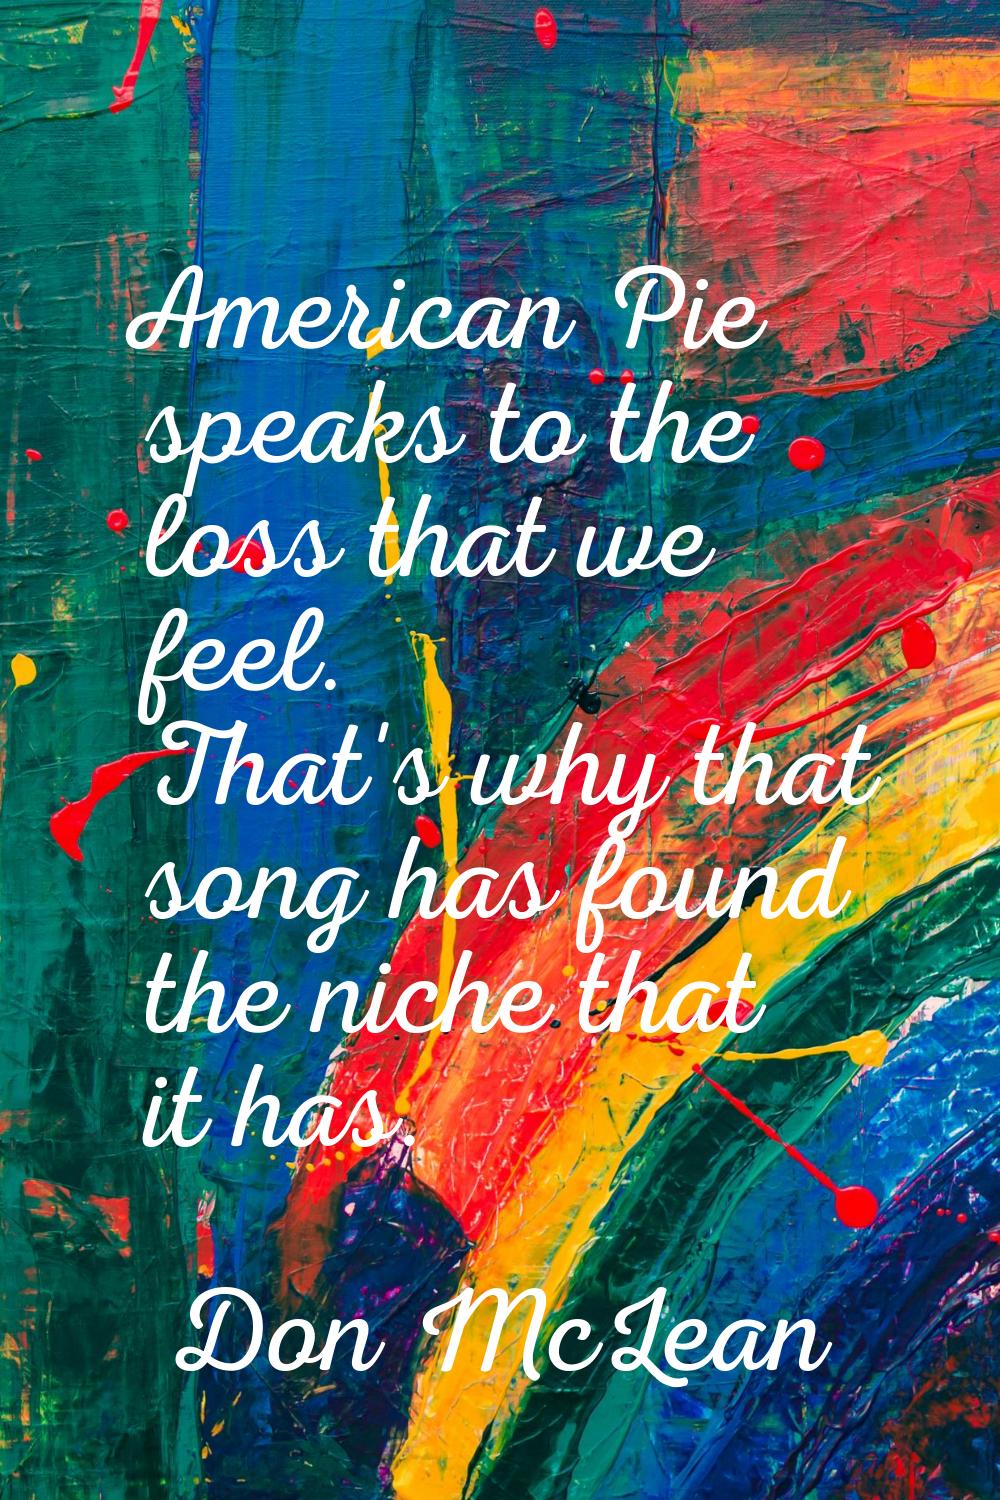 American Pie speaks to the loss that we feel. That's why that song has found the niche that it has.